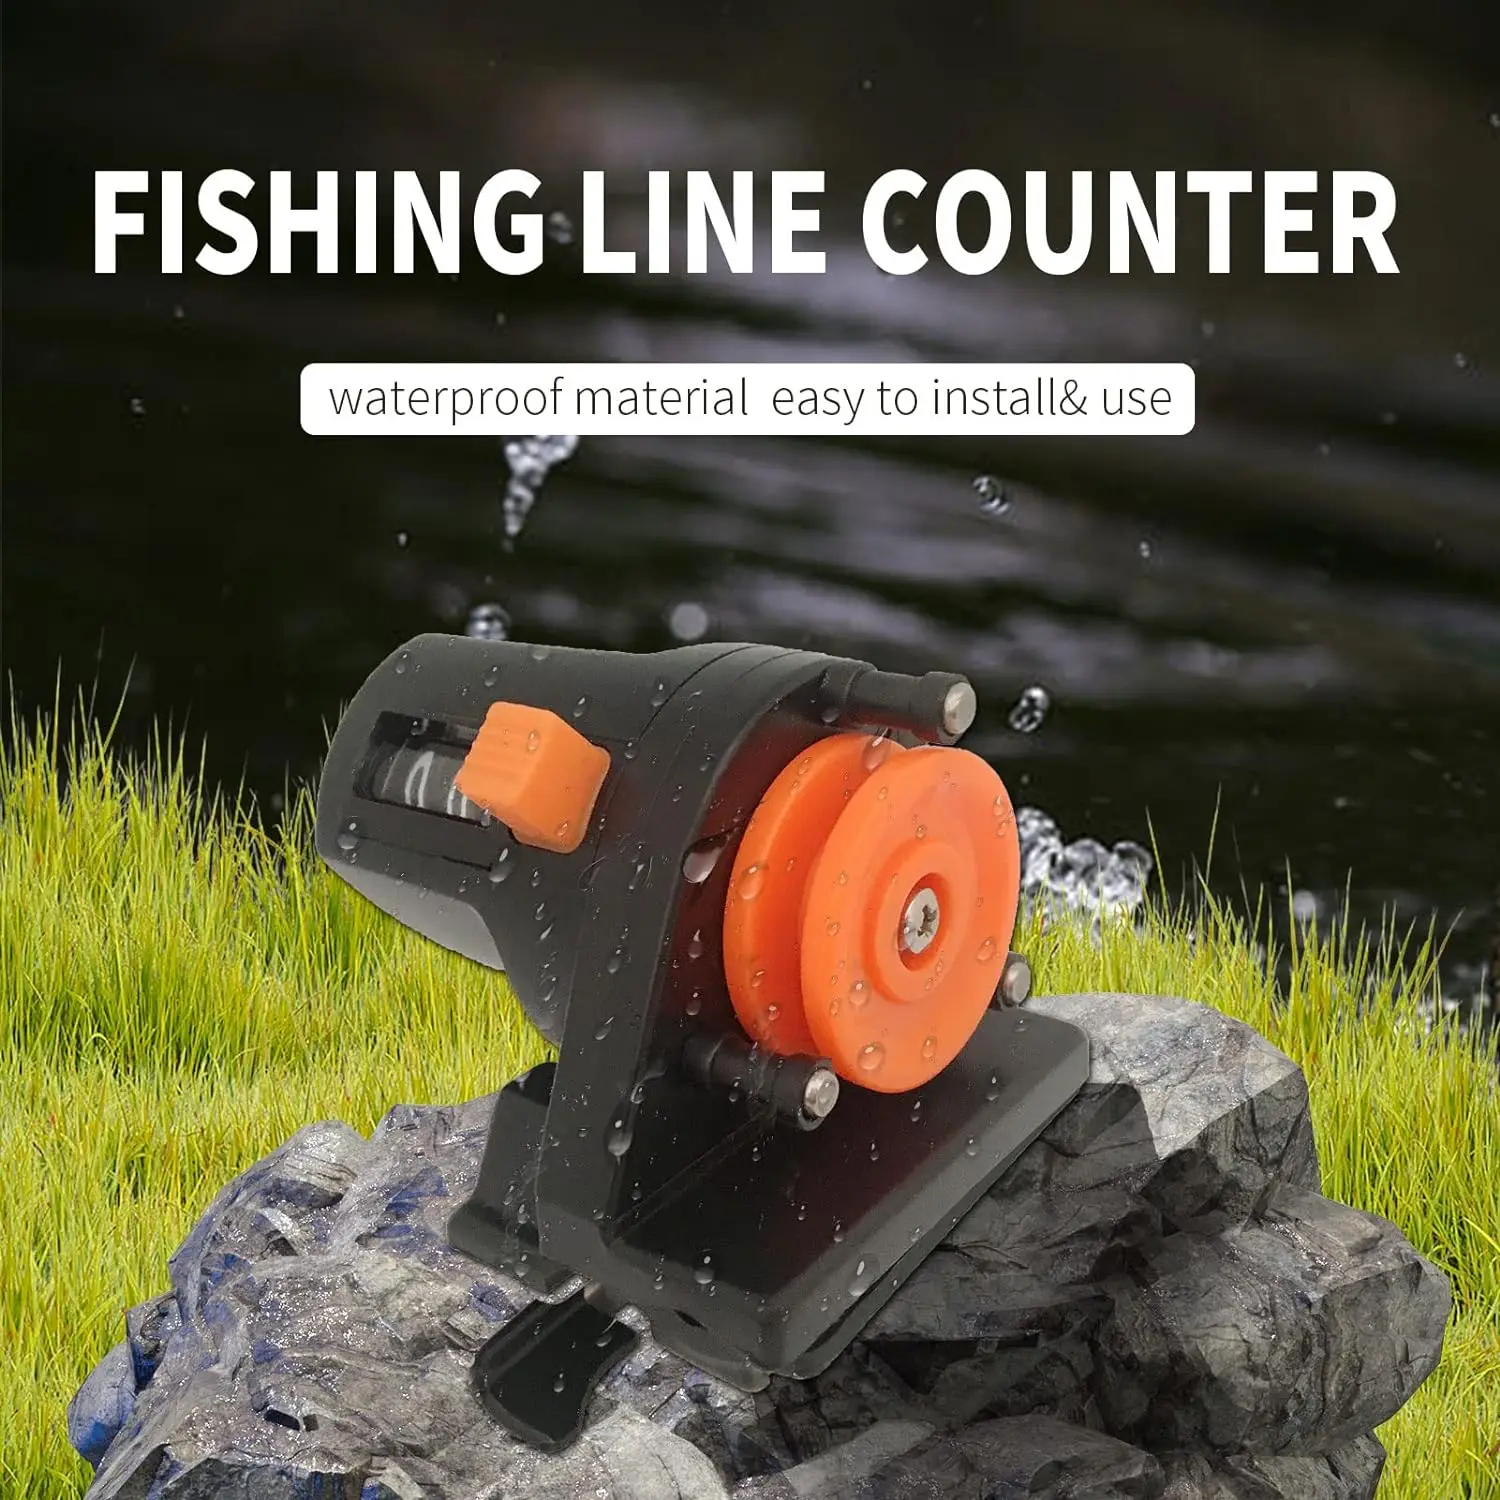 https://ae01.alicdn.com/kf/S09efc275412b40608beede247ff42a498/2-Fishing-Line-Counters-for-Spool-and-Towing-Fishing-Line-Depth-Detector-Counter-0-999M-Depth.jpg